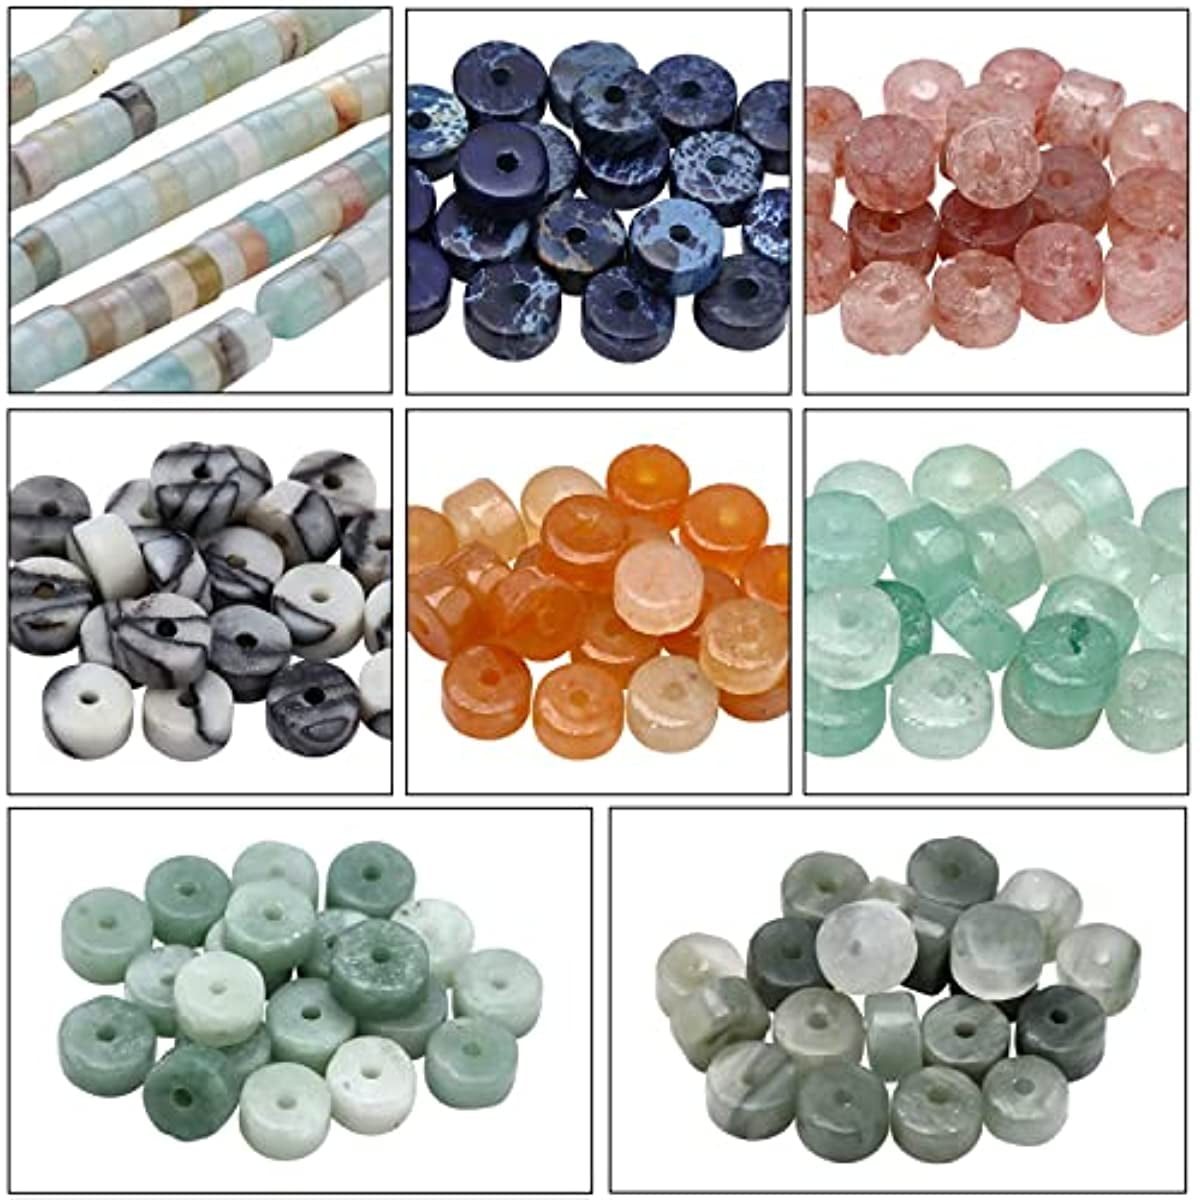 Qenwkxz 1000pcs 4mm Crystal Glass Beads 10 Colors Finding Spacer Beads Bicone Shaped Faceted Bead with Box for Jewelry Bracelets, Necklaces, Earrings